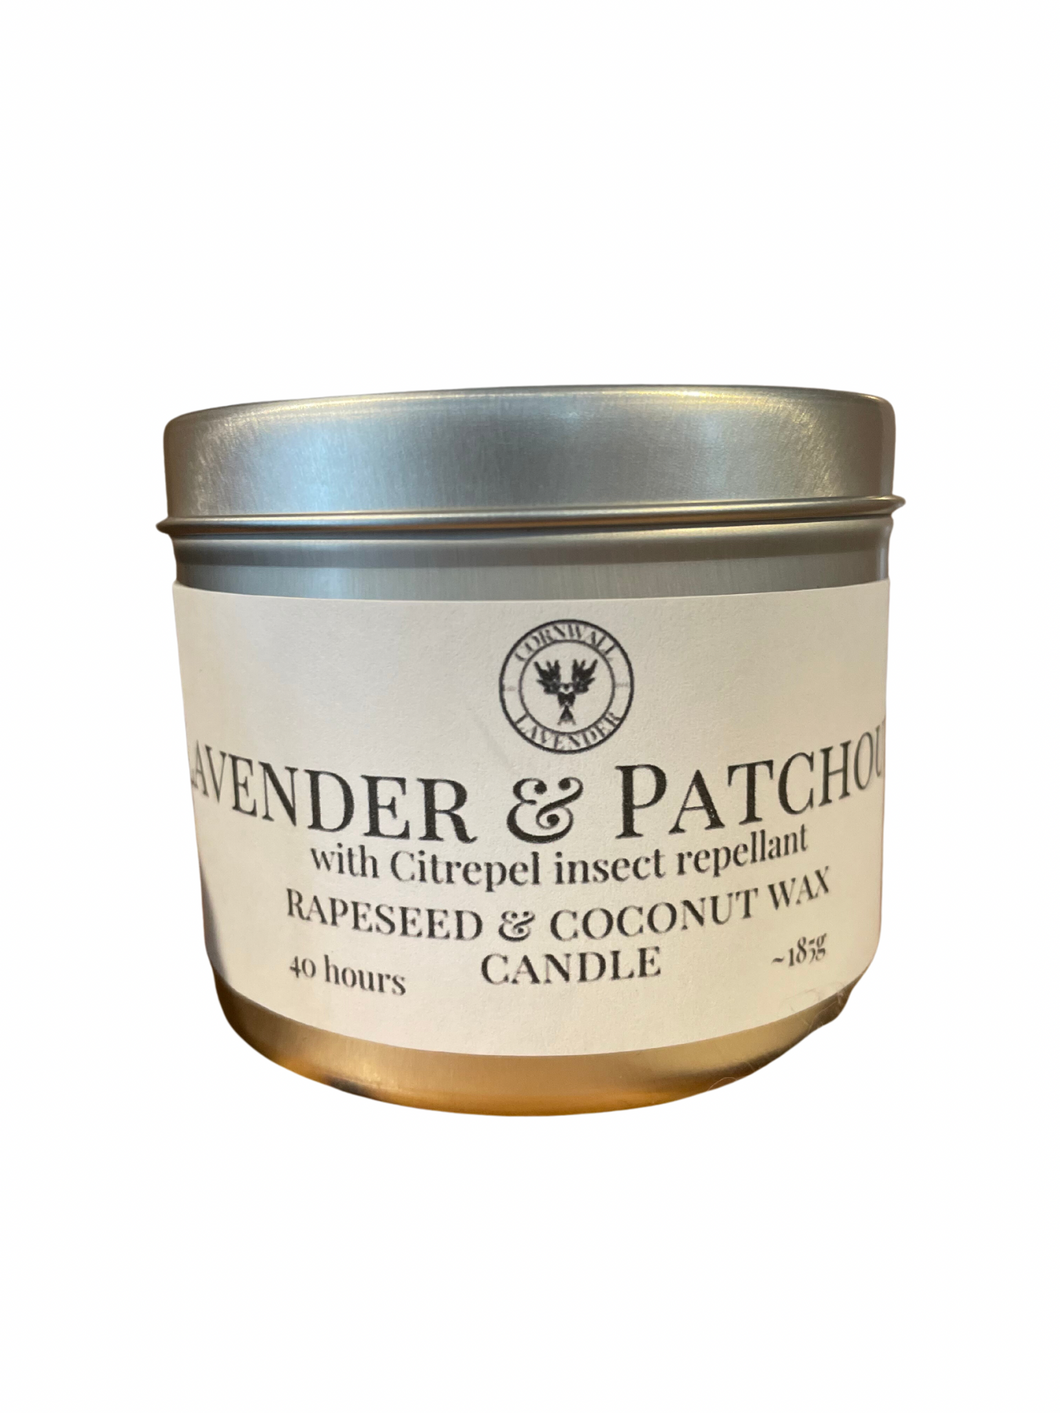 Lavender & Patchouli with natural insect repellent.185g